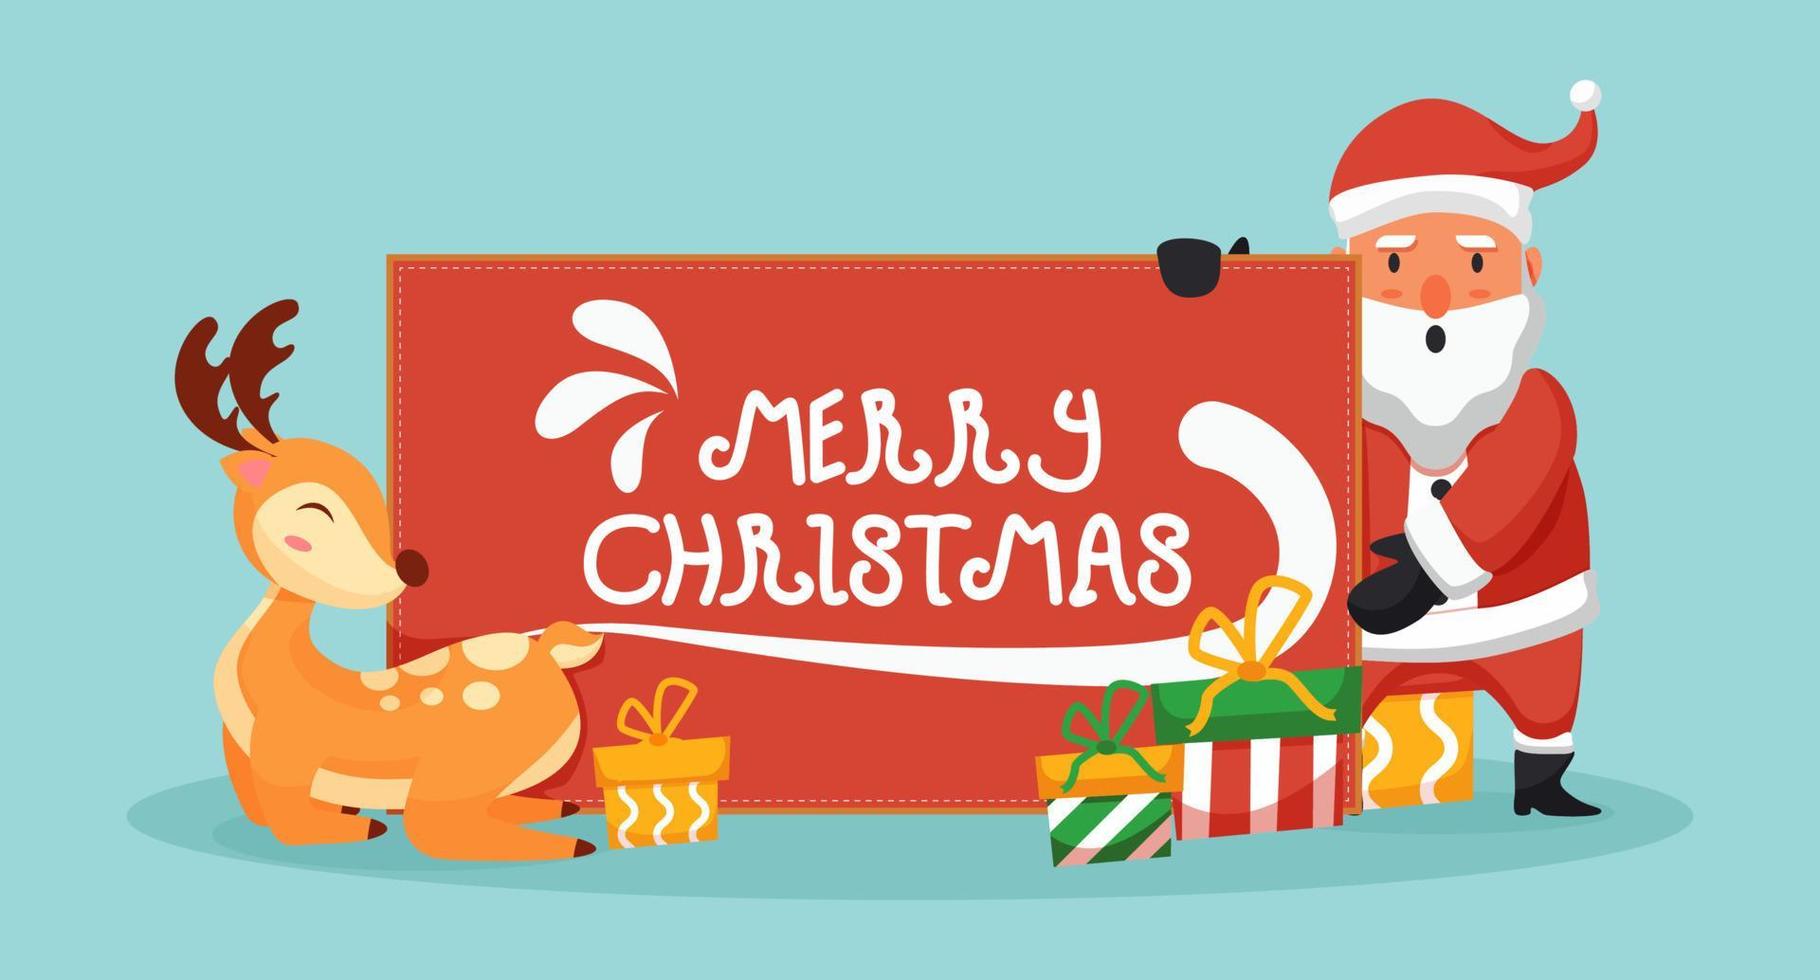 Christmas day card illustration with santa claus and reindeer vector